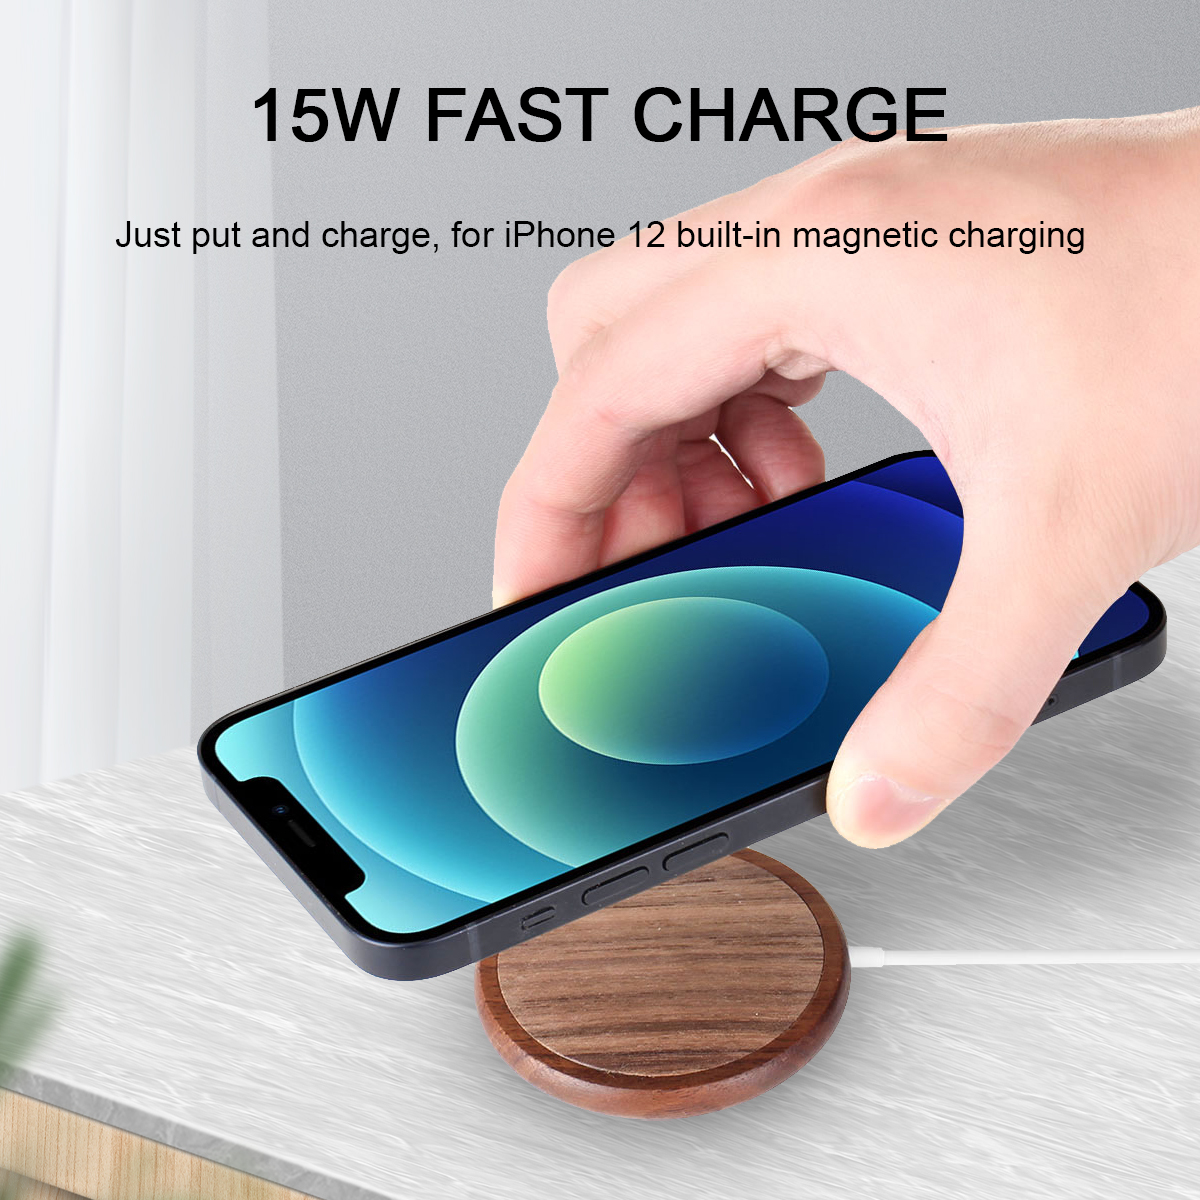 Bakeey 15W Magnetic Wireless Charger for iPhone 12 Series for iPhone 12 Mini/12 Pro/12 Pro Max for Samsung Galaxy Note S20 ultra Huawei Mate40